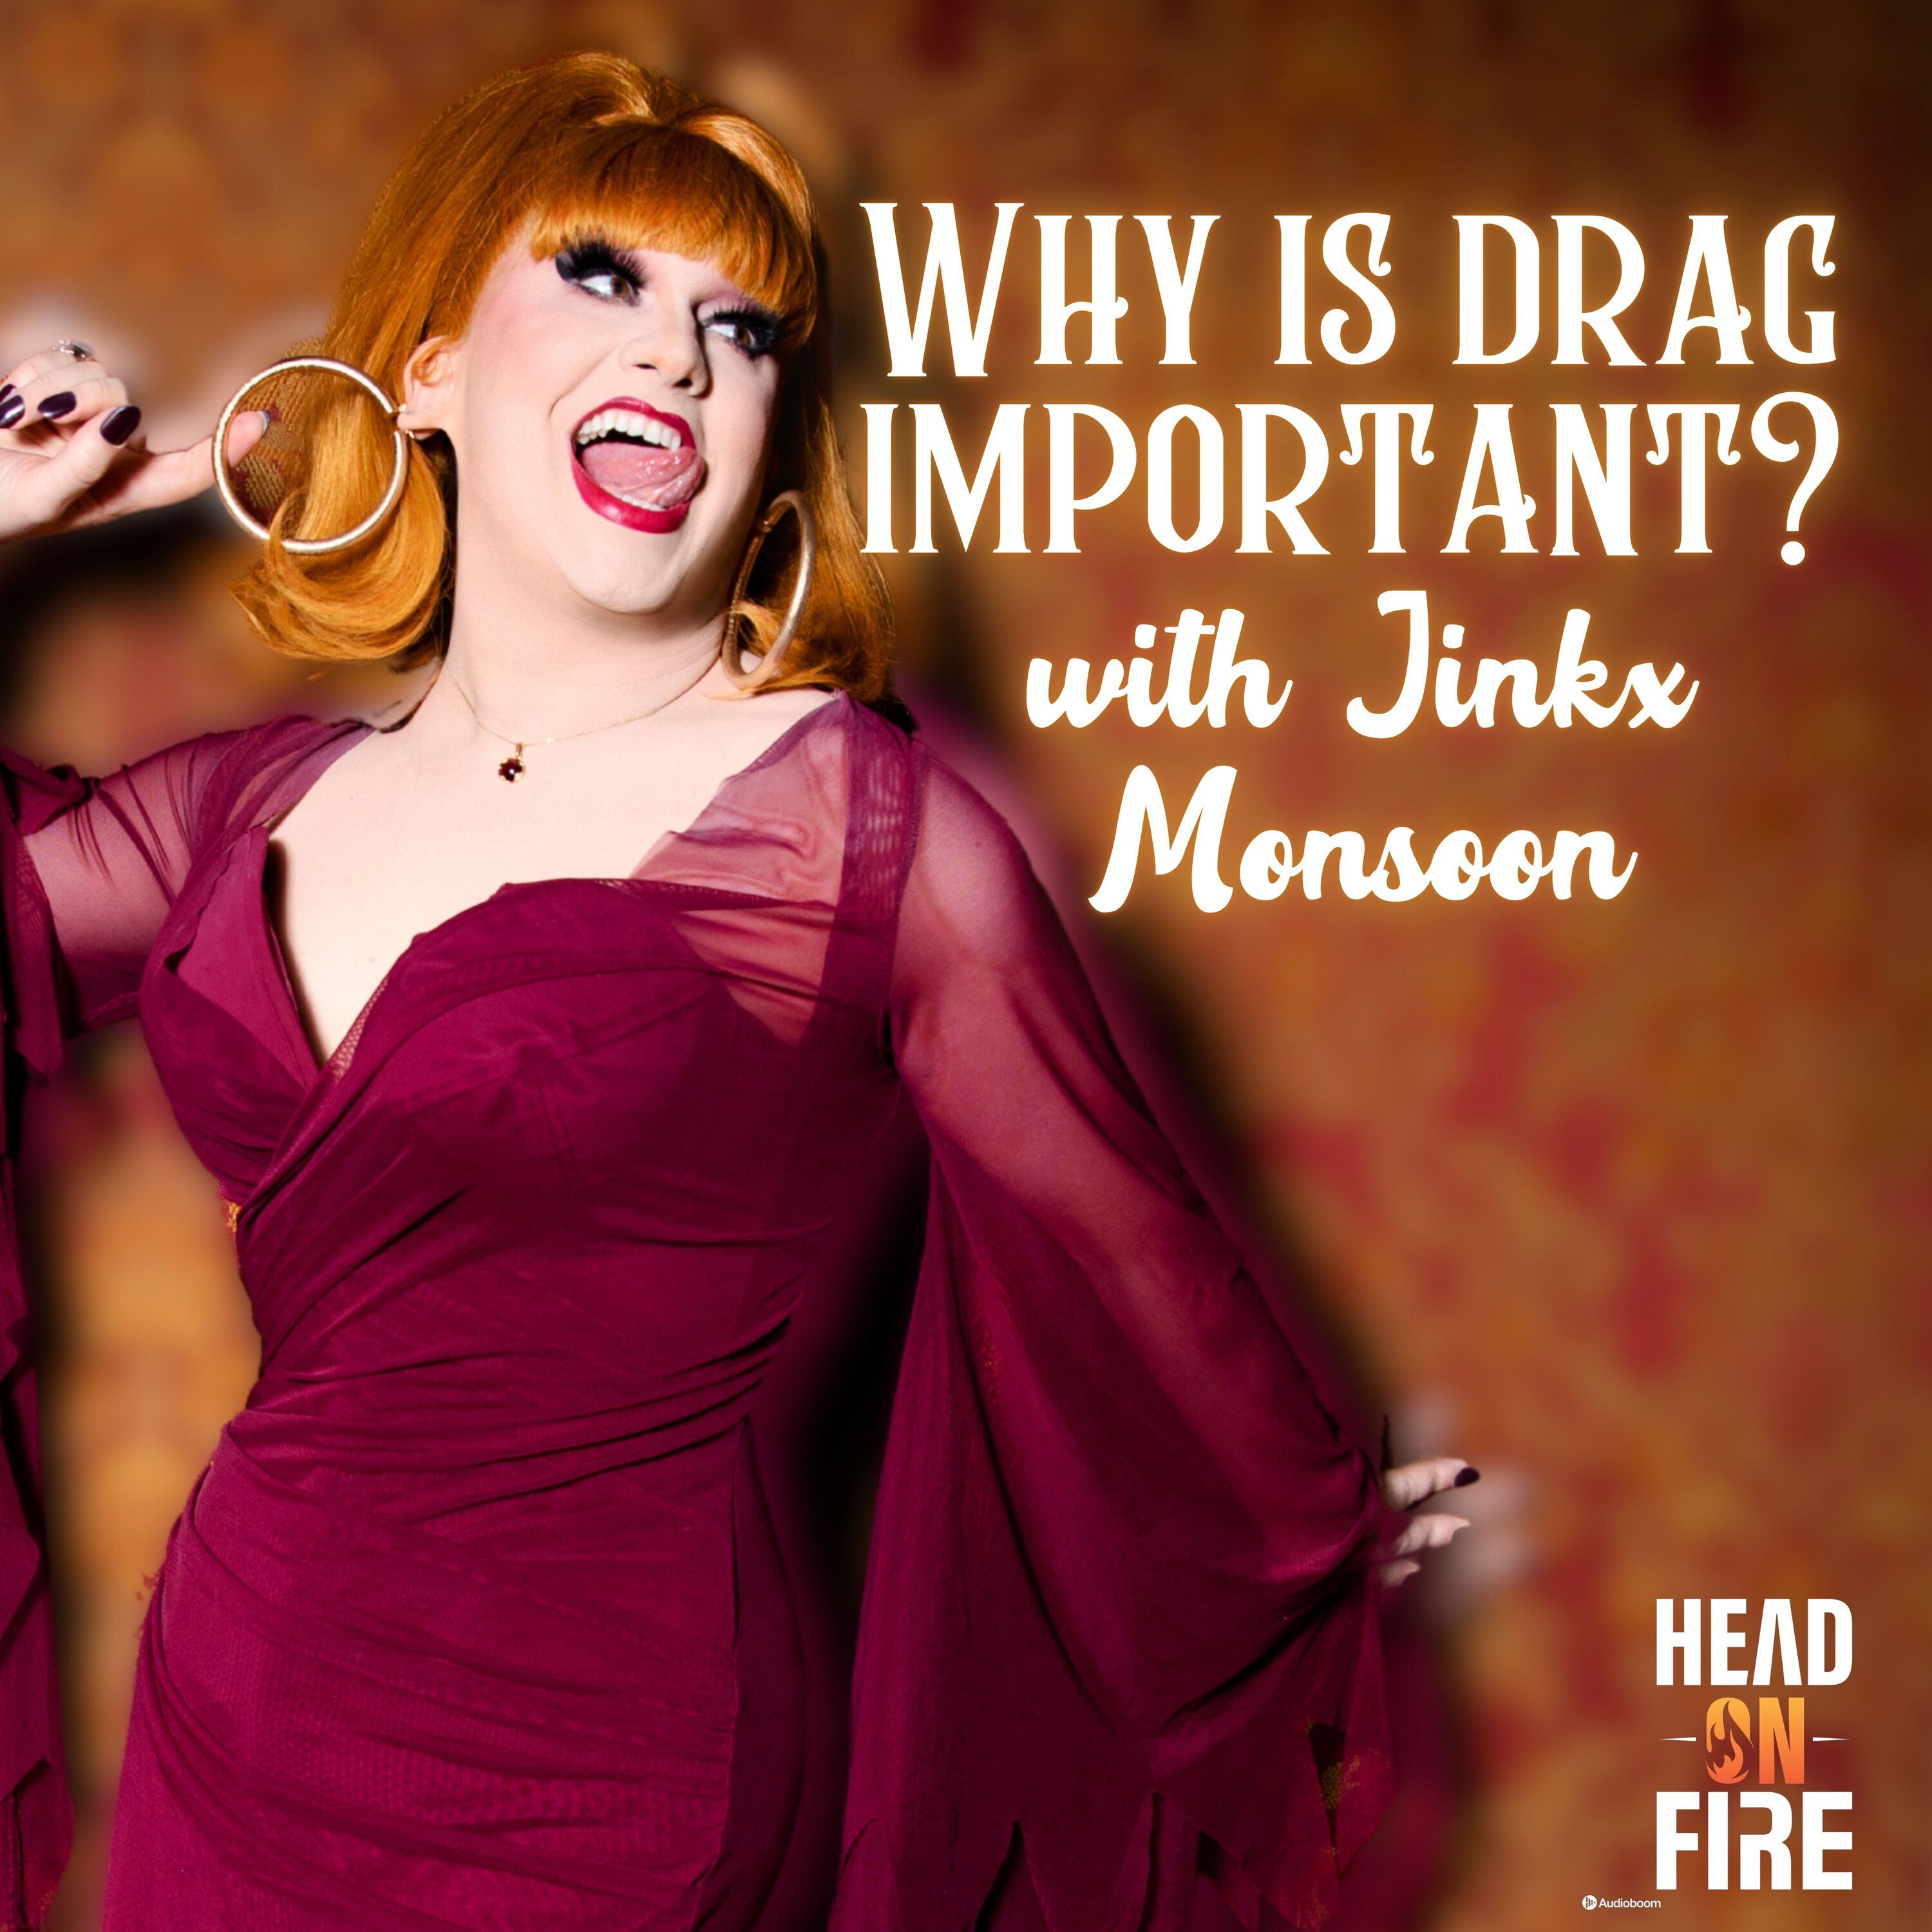 Why is drag important? with Jinkx Monsoon